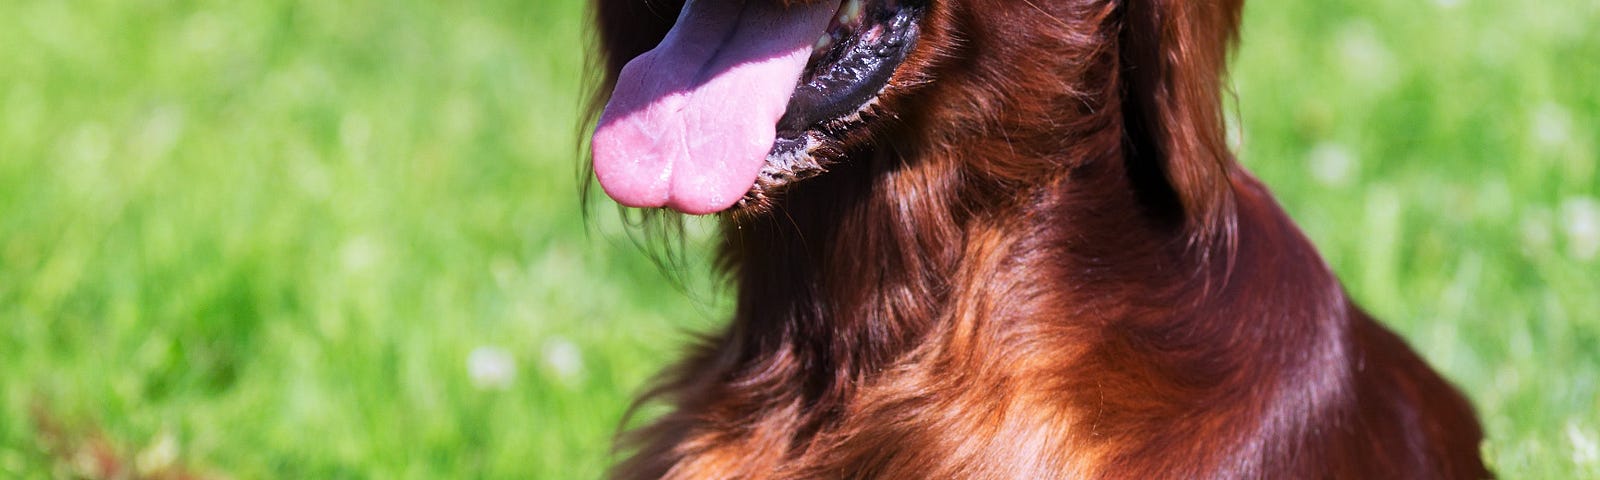 Happy Irish Setter laying in the grass. Phaedra laughing at the stupid human.